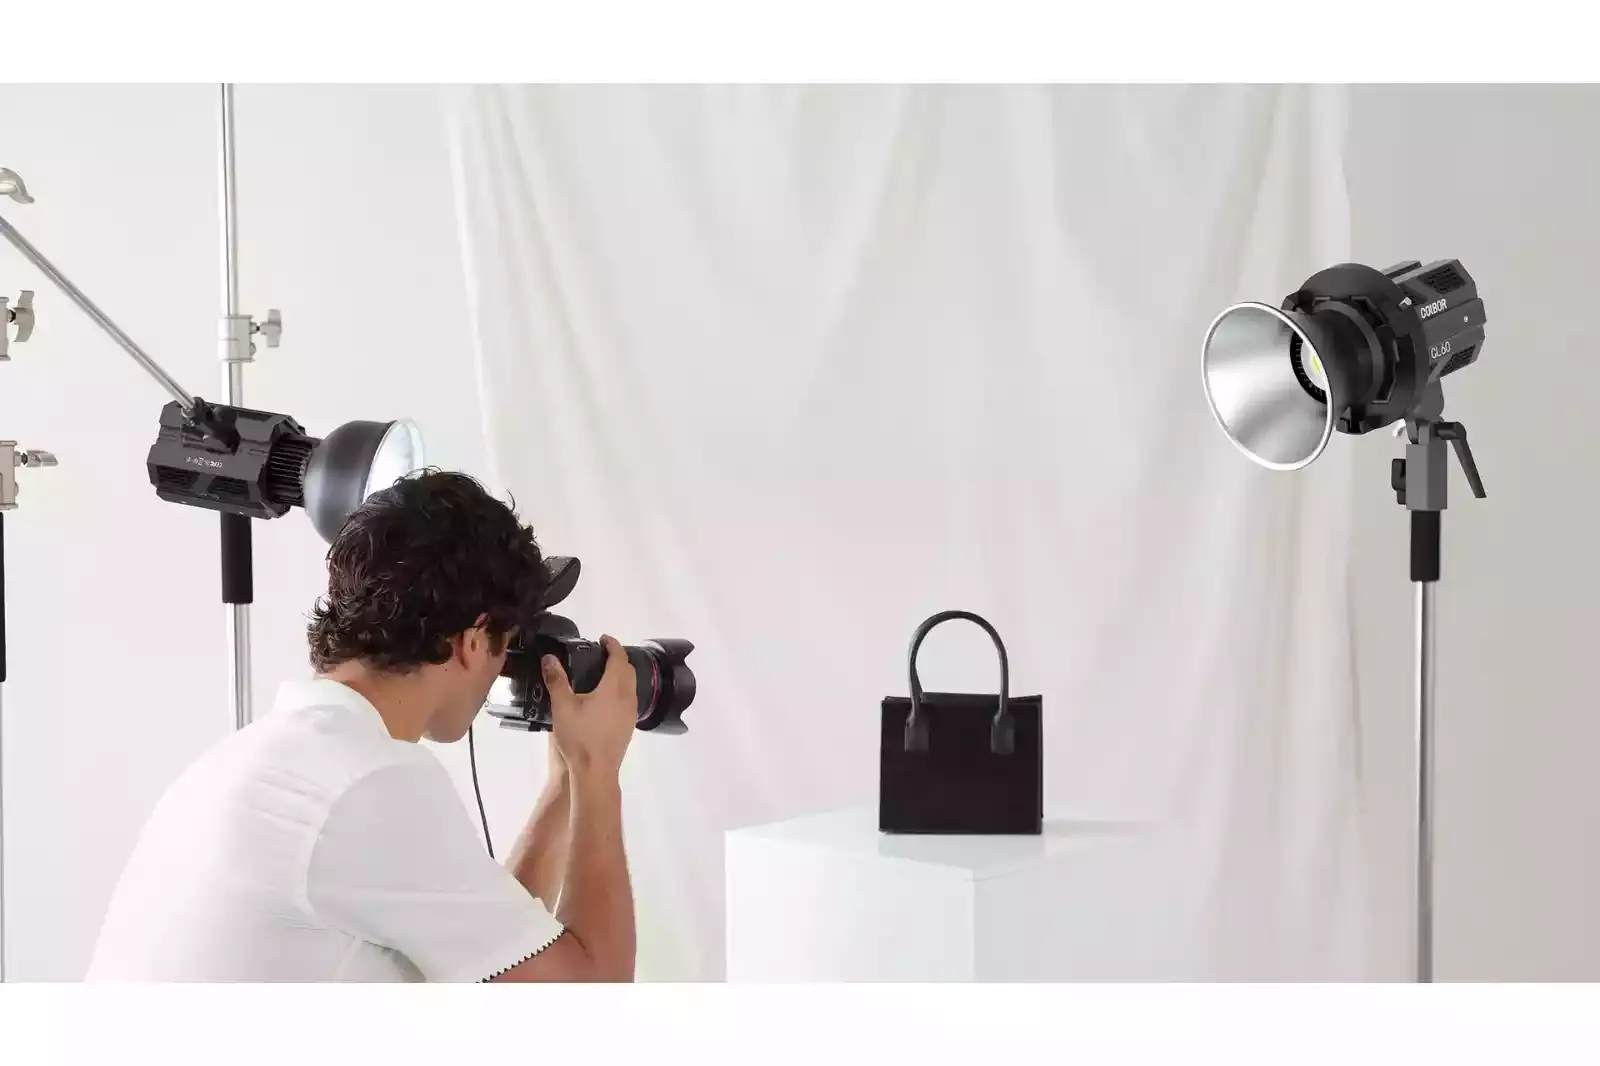 Are LED Lights Good for Product Photography